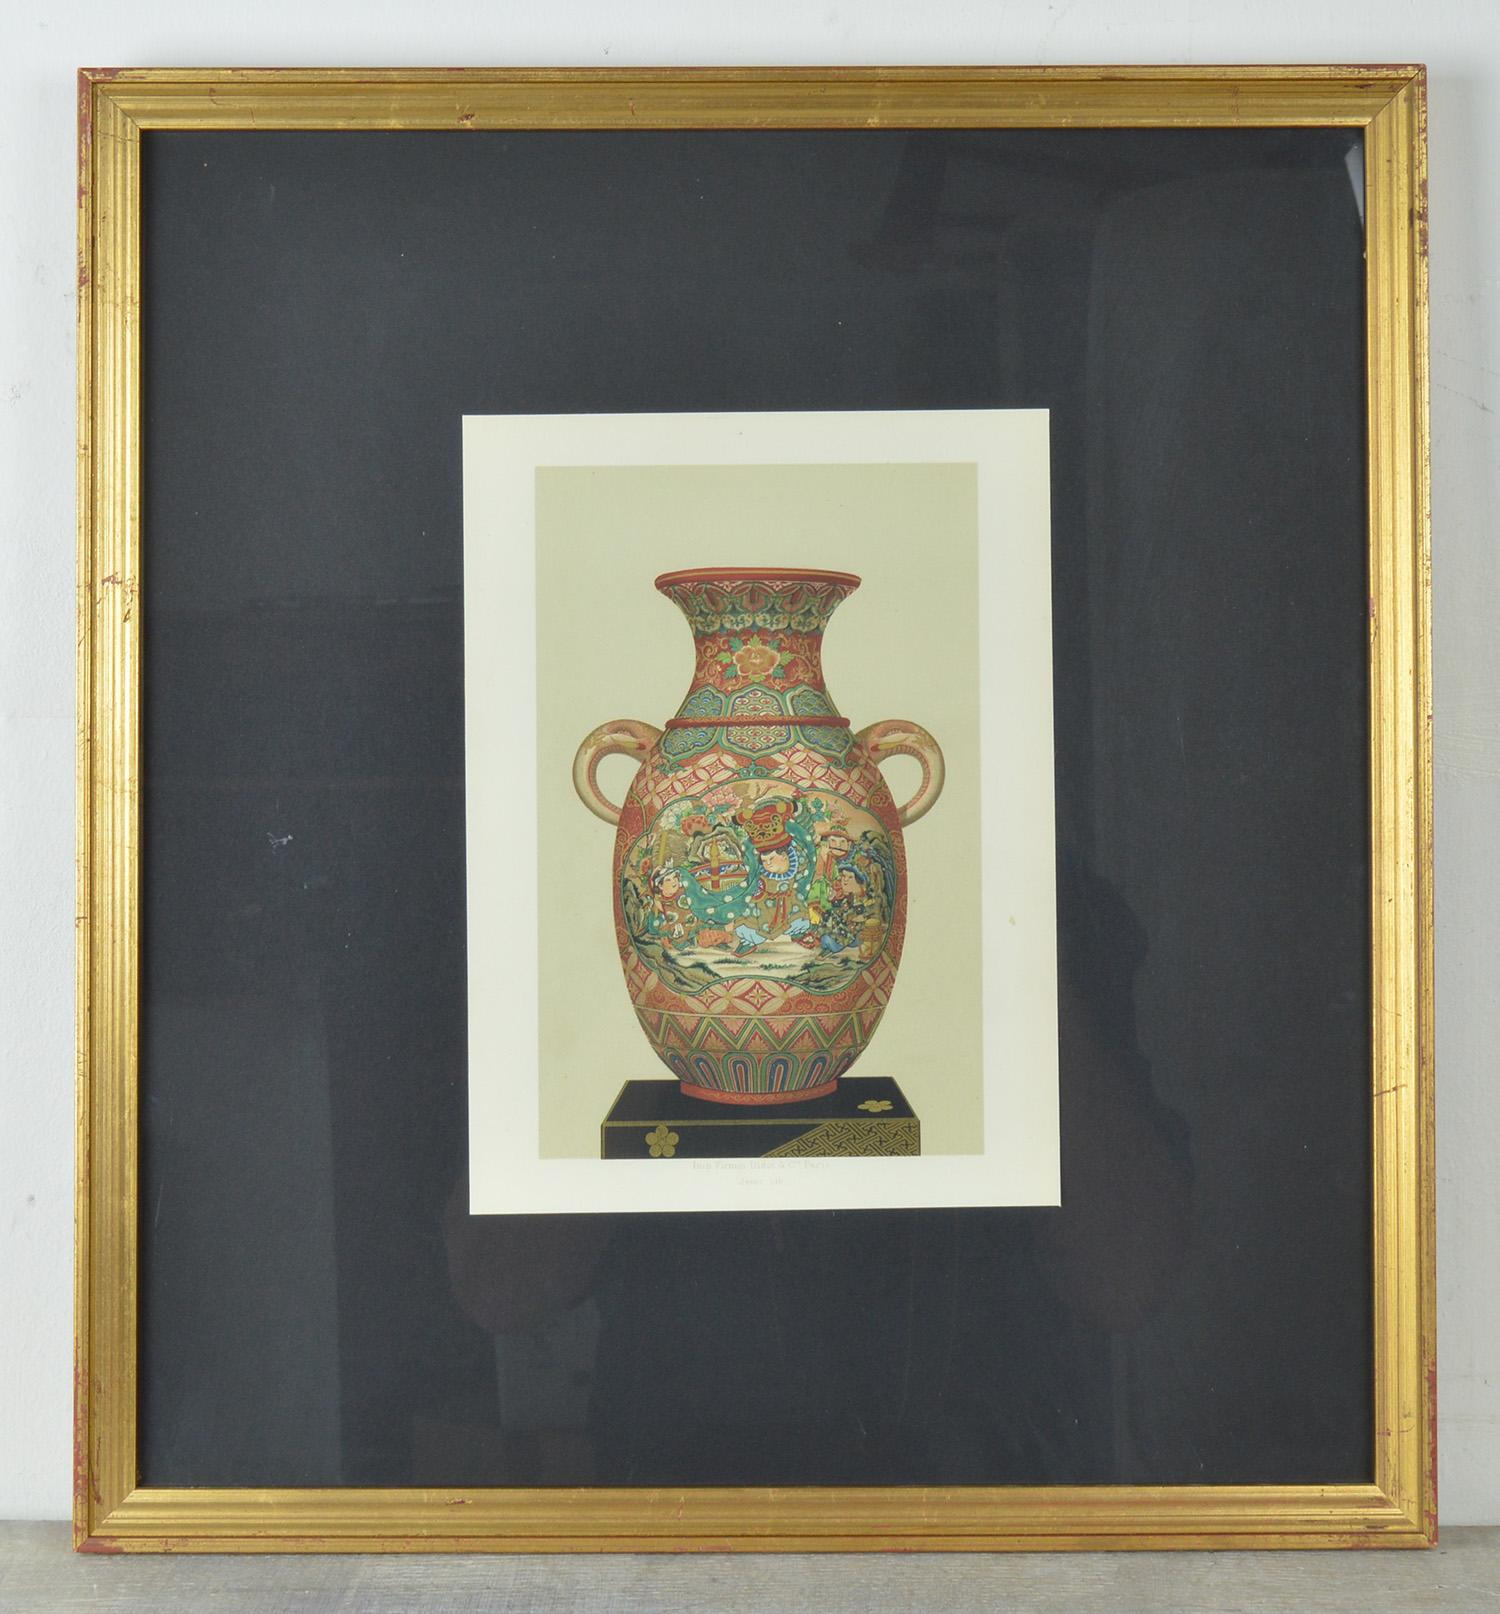 Three amazing chromolithographs of Japanese vases.

Published by Firmin Didot, Paris. circa 1870

Superb colors and detail.

I particularly like the gilt highlights.

Mounted on black card and presented in new gilt frames.

The measurement